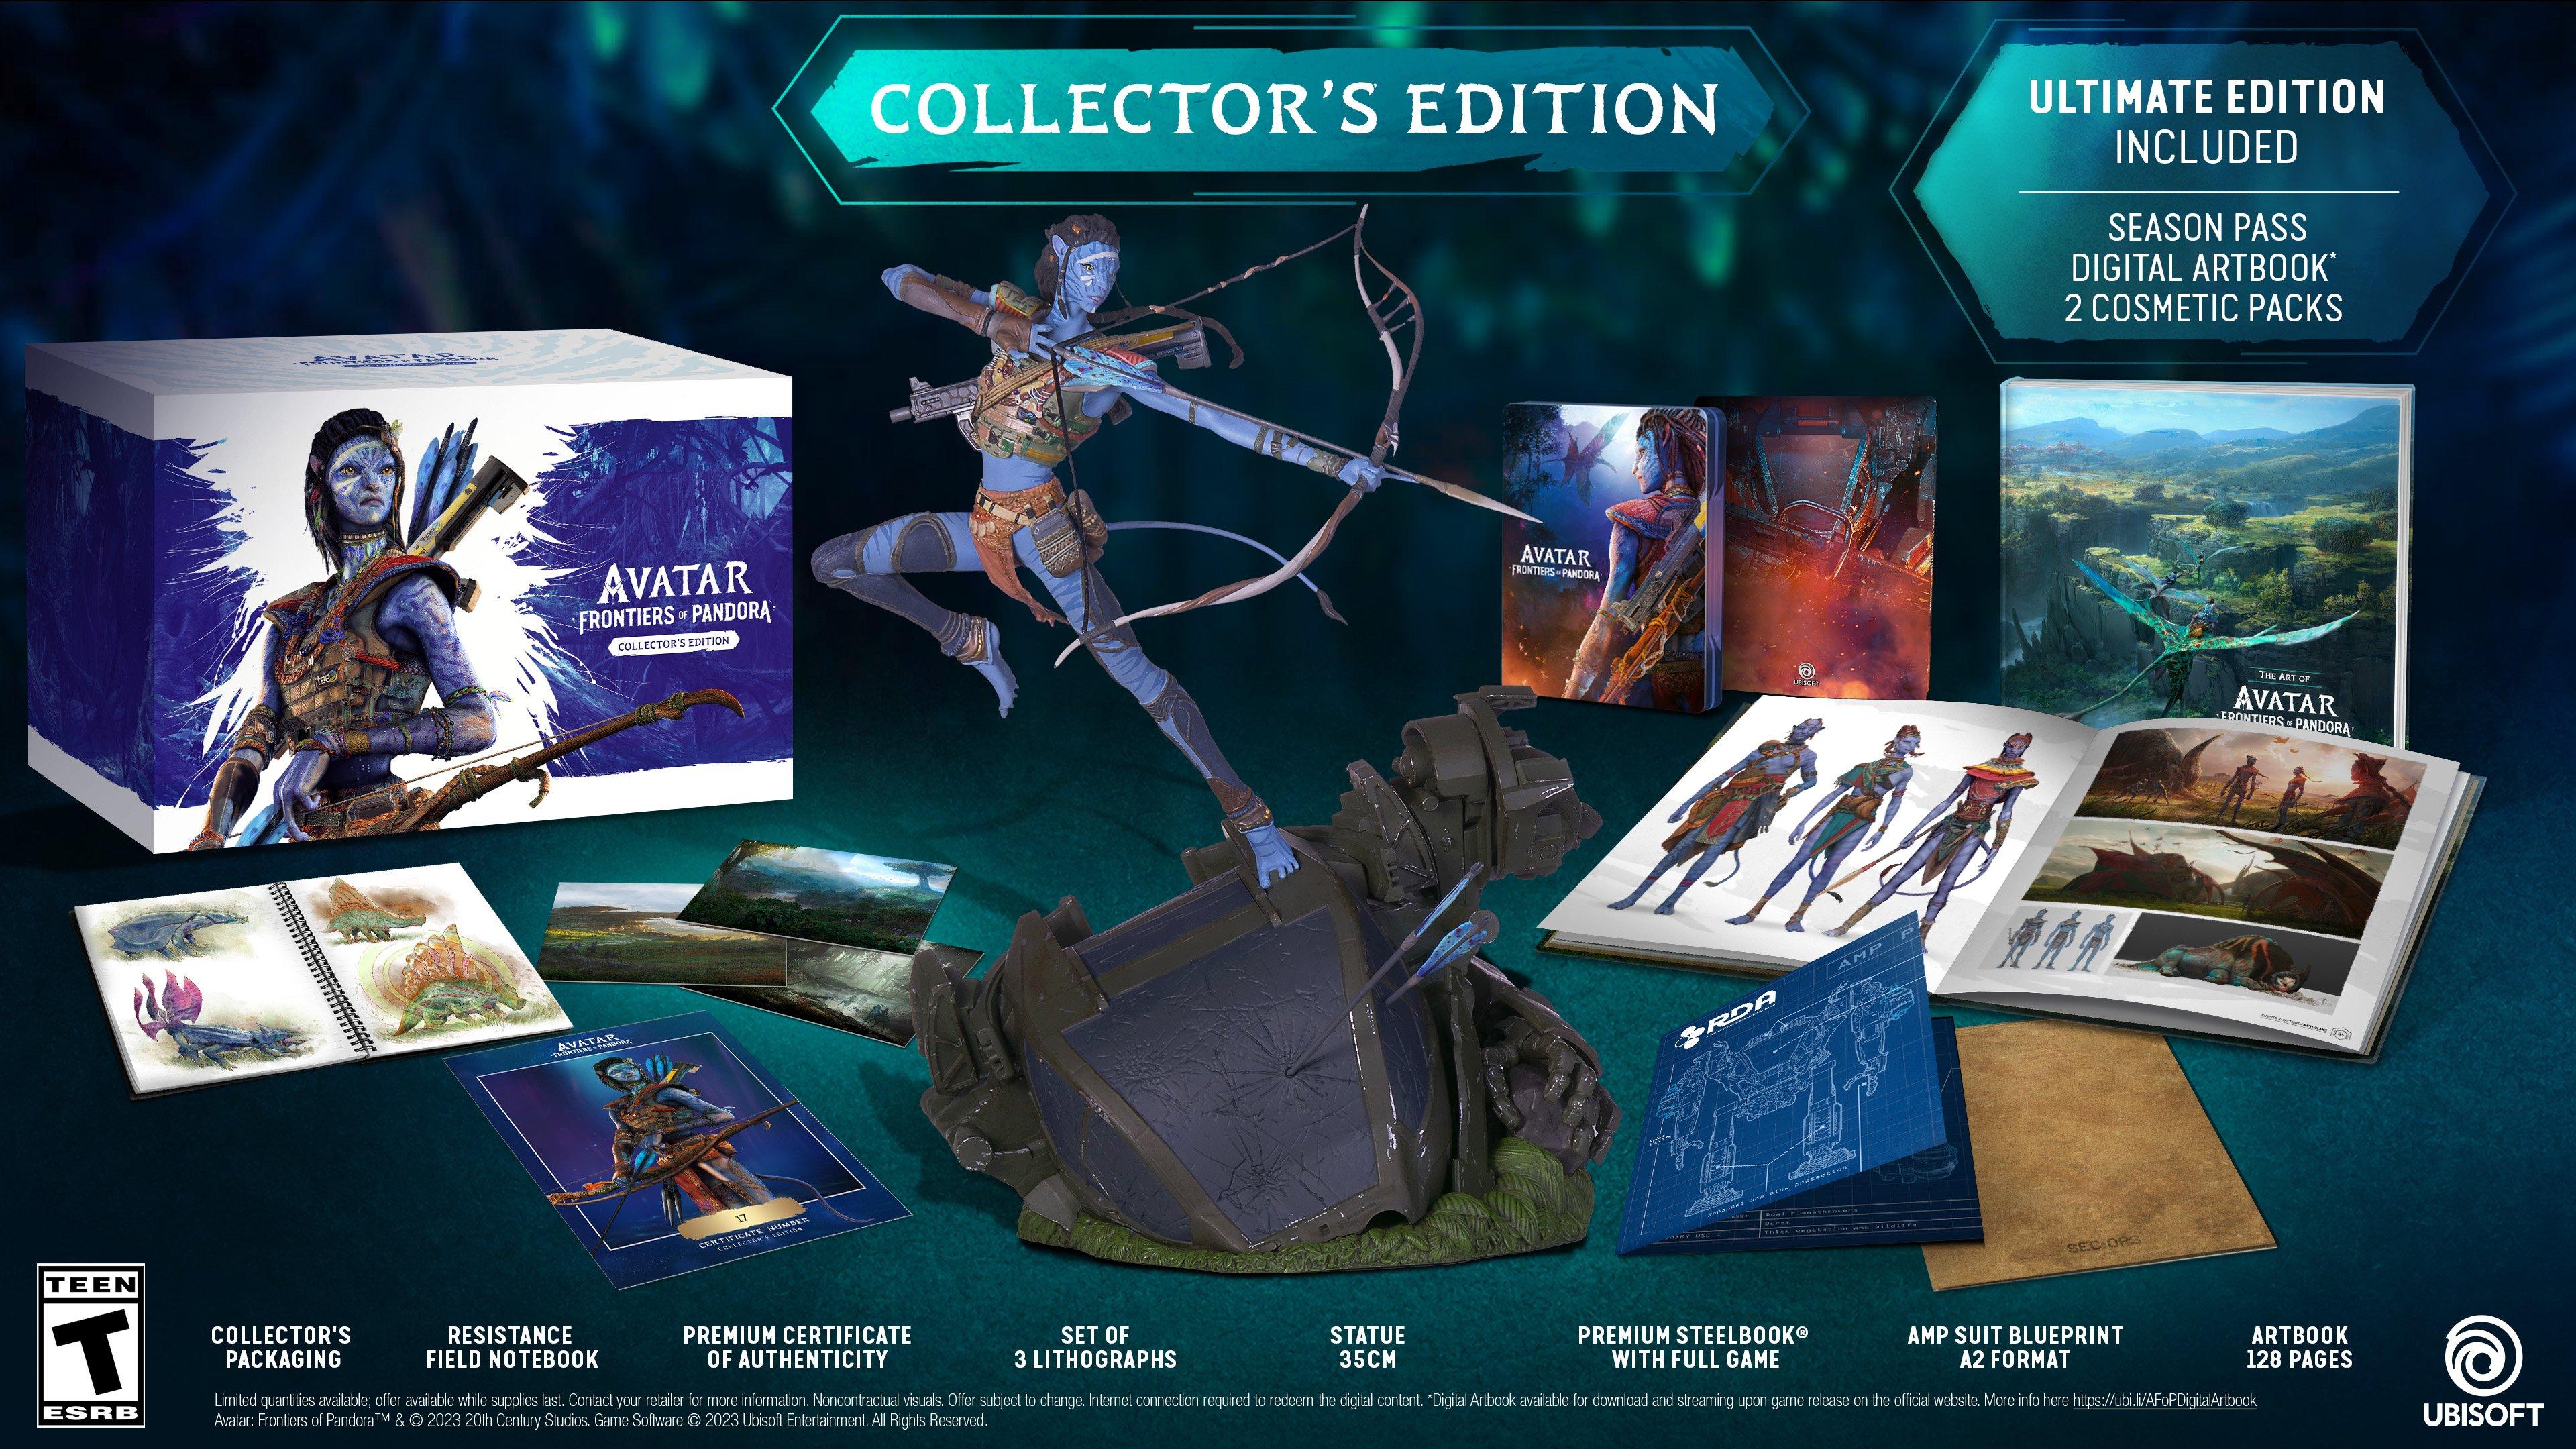 Avatar: Frontiers of Pandora Special Edition. Playstation 5